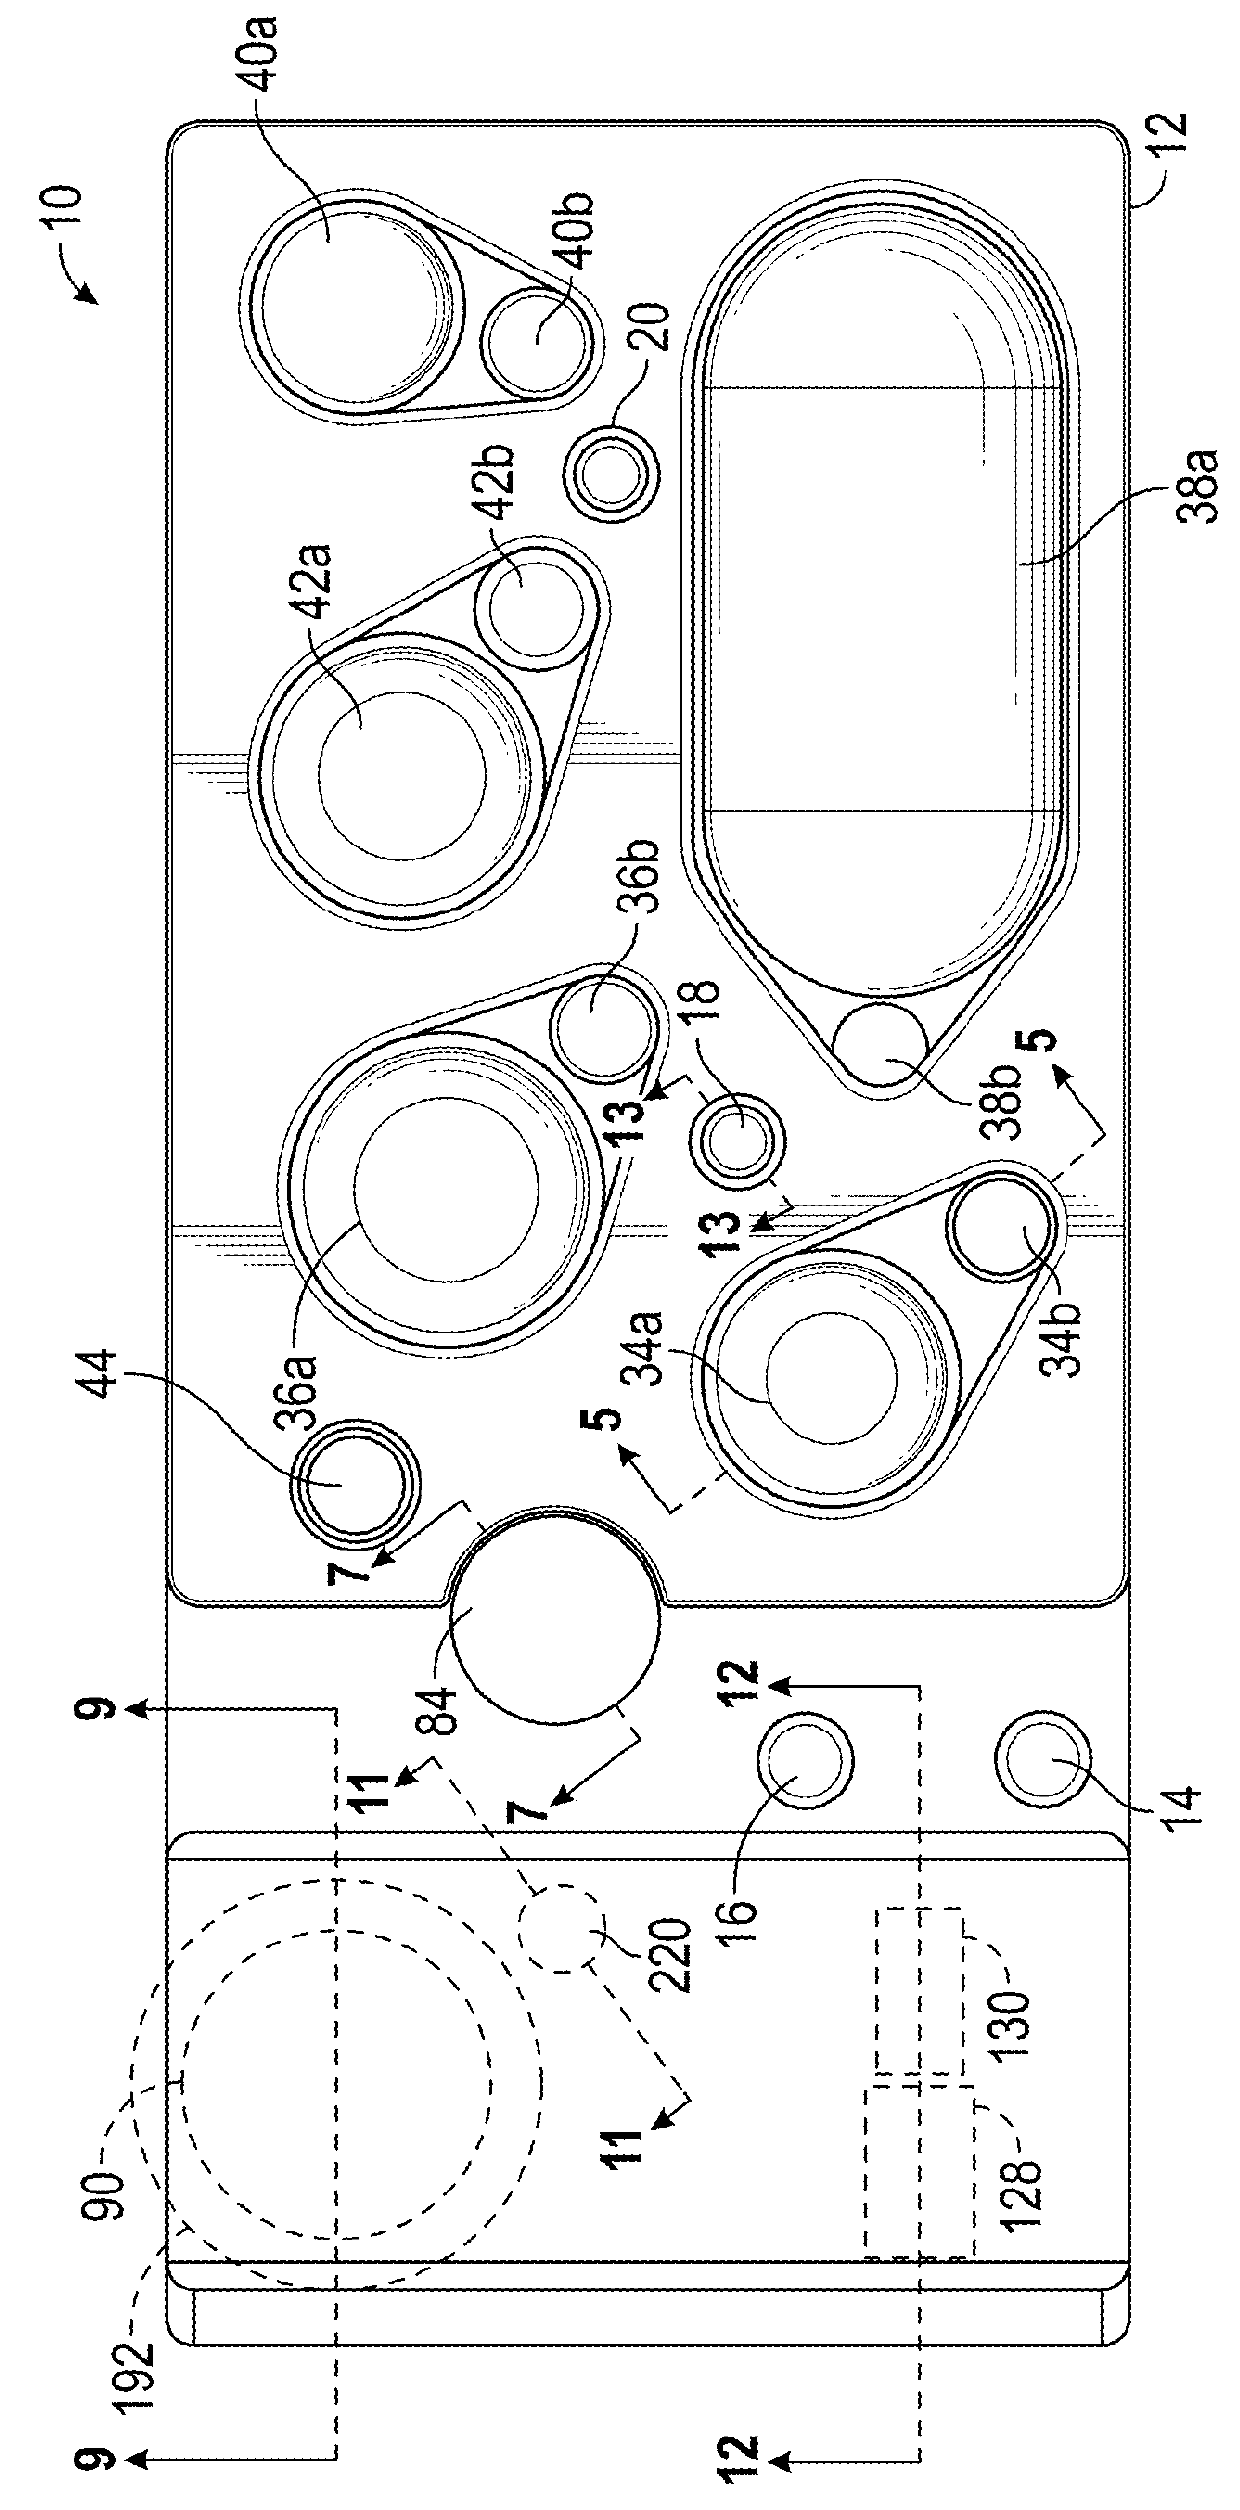 Instrument for processing cartridge for performing assays in a closed sample preparation and reaction system